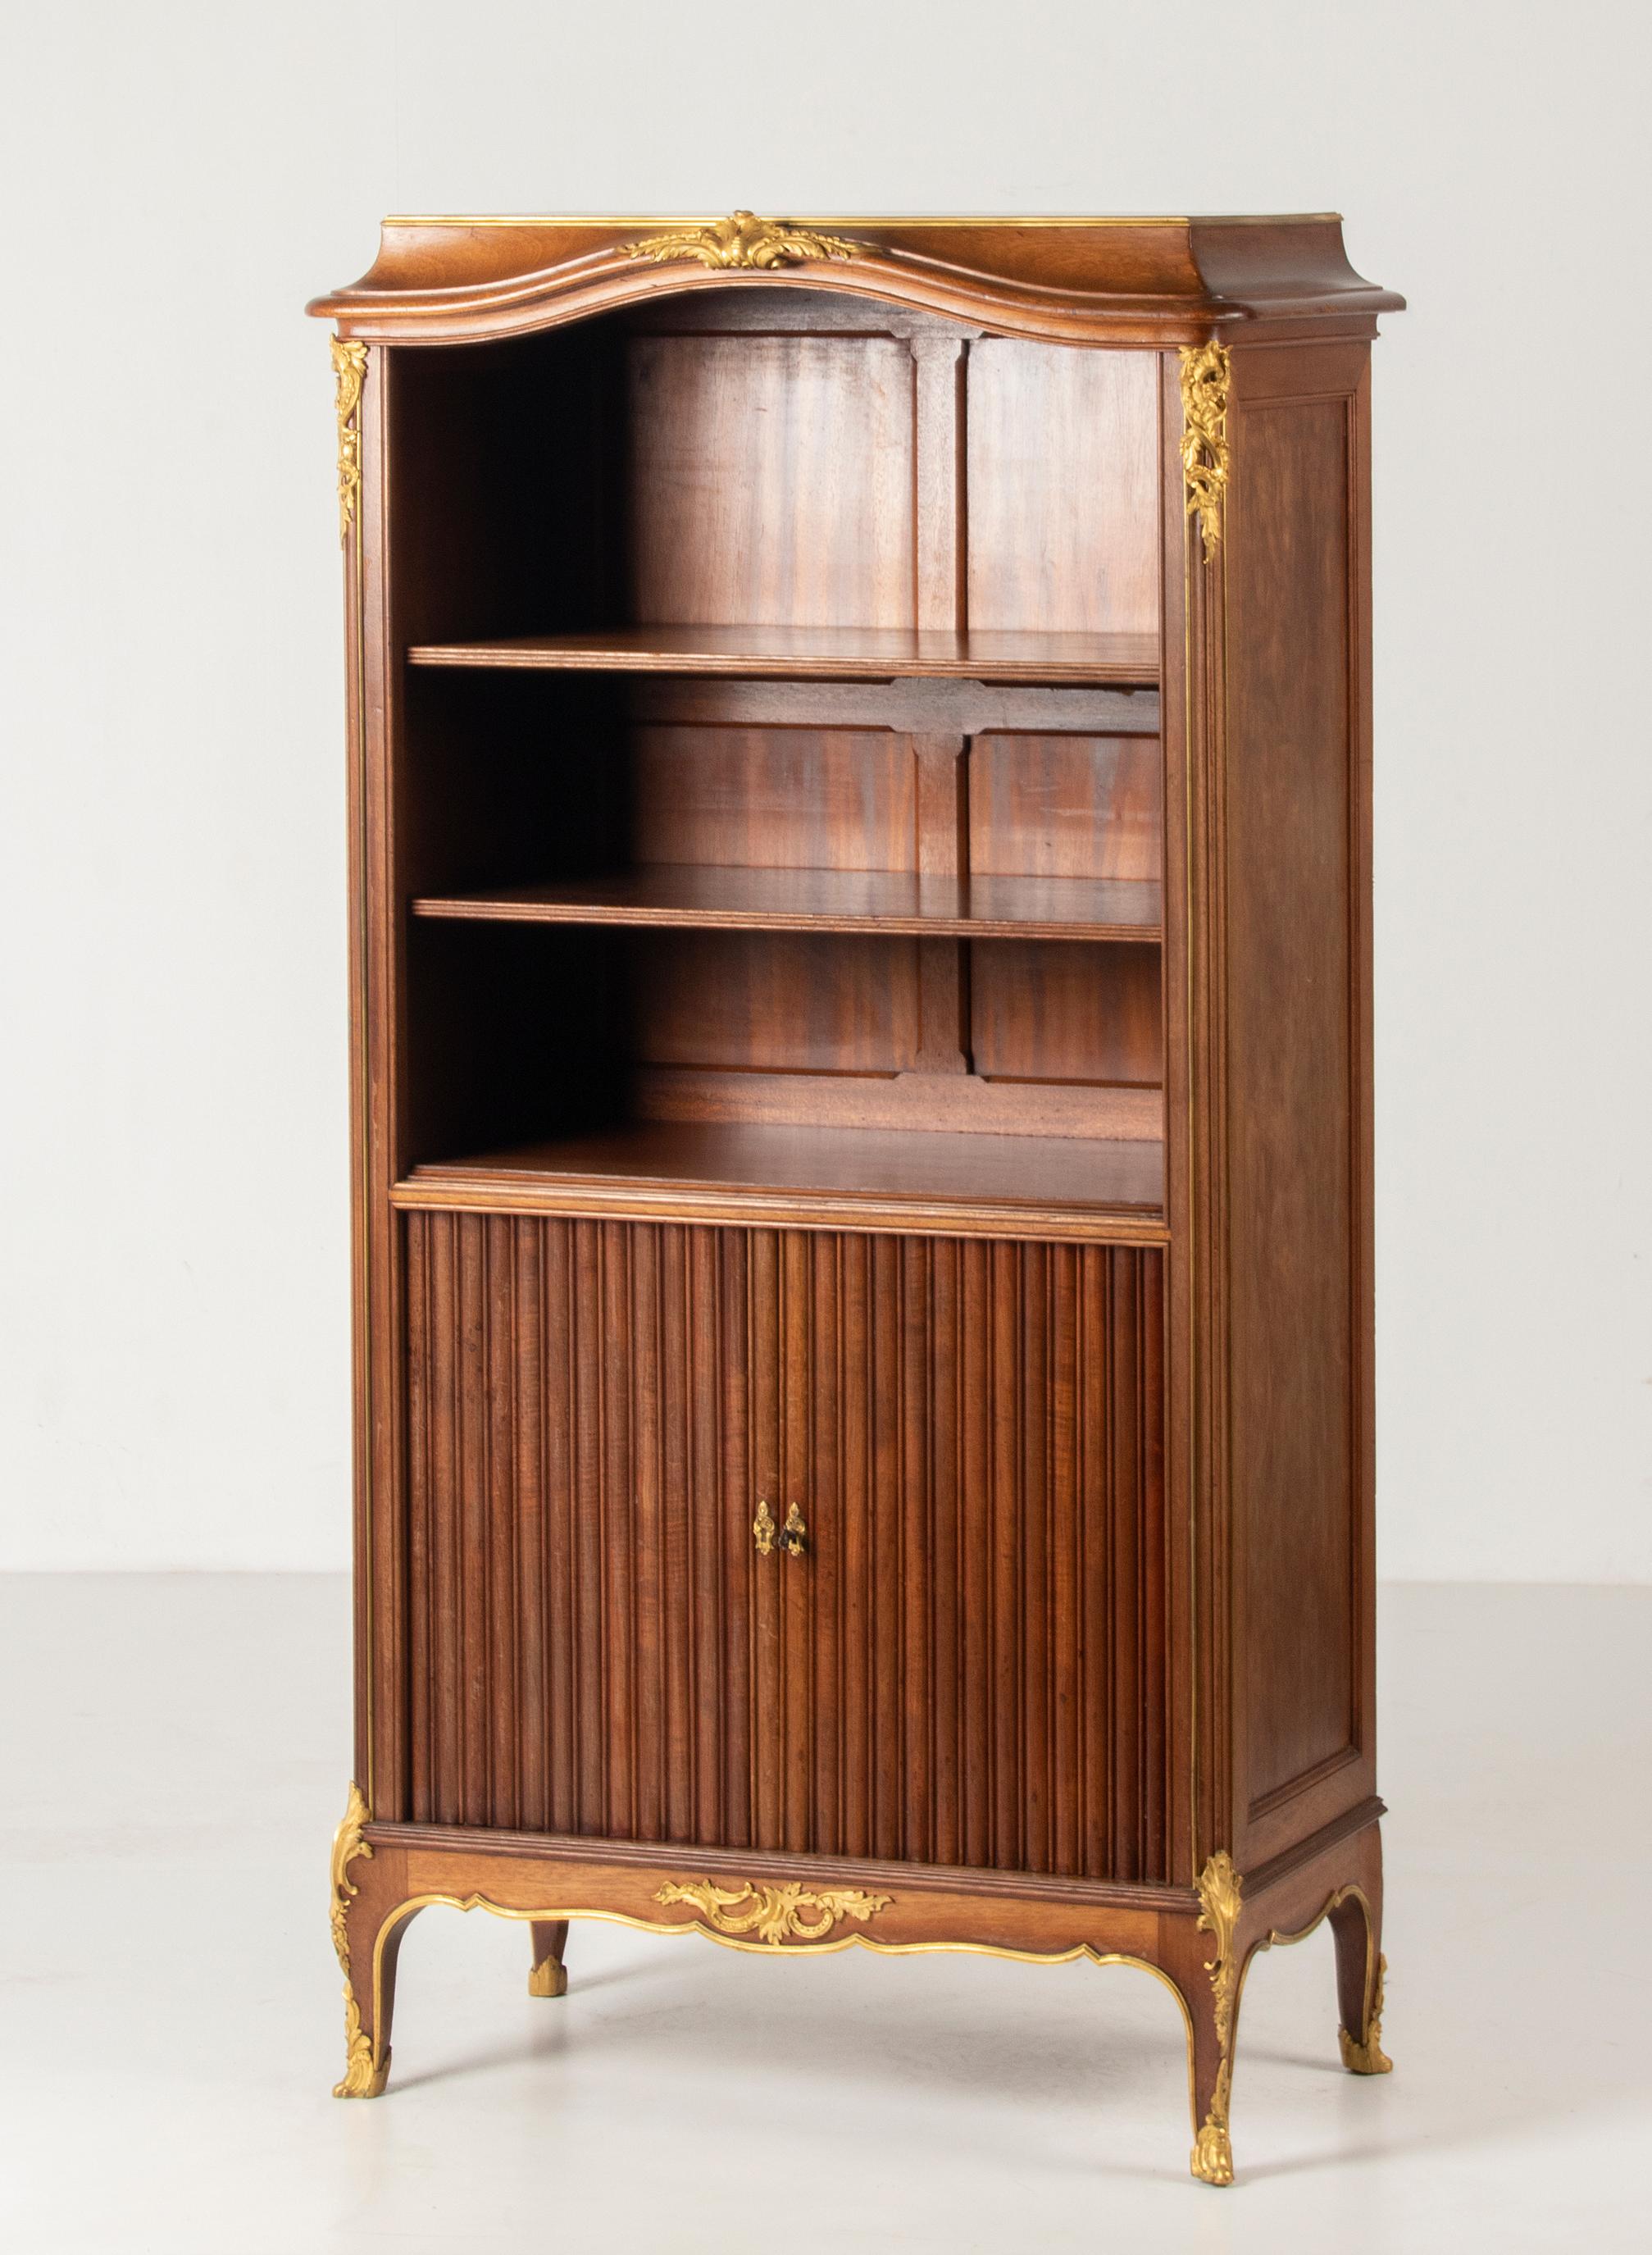 An antique French tambour door bookcase, made of solid mahogany wood. It's made in France, at the the end of the Napoleon III period, 1860-1870. The lower part has tambour sliding doors. The cabinet is embelished with ormolu gilt bronze ornaments.